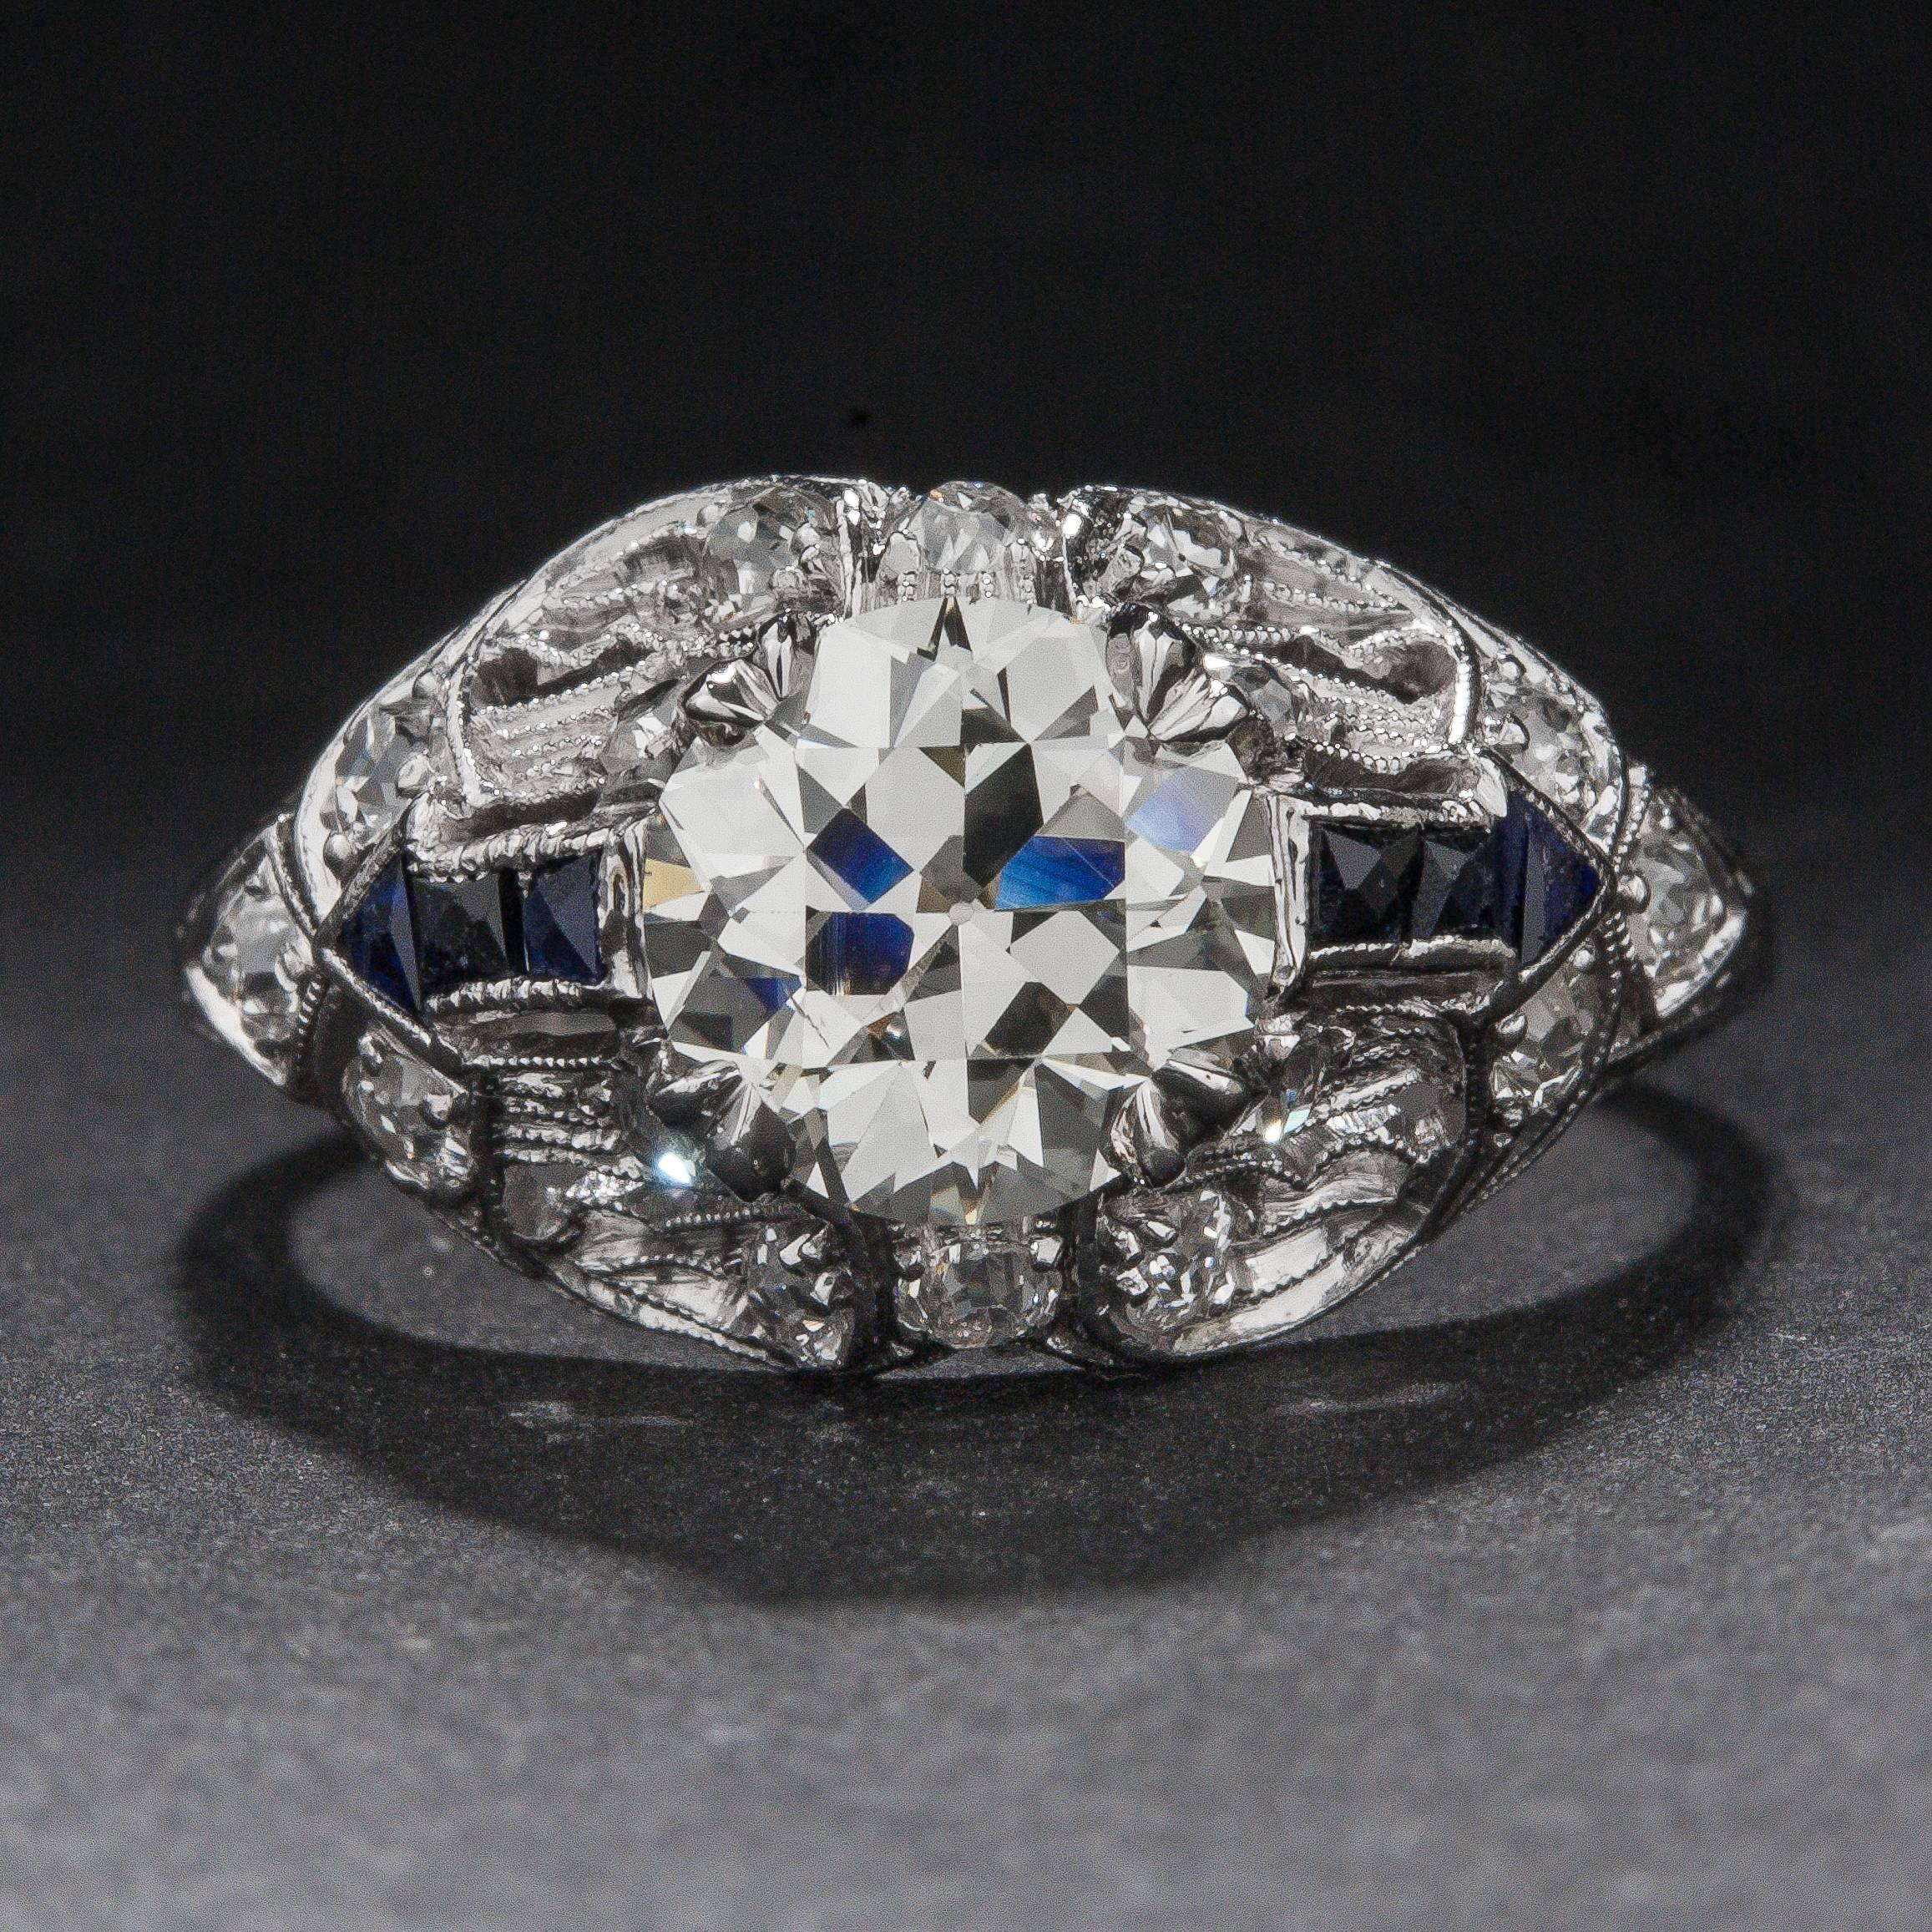 This stunning Art Deco era ring features a 1.38 carat Old European Cut center diamond (Estimated J color, SI1 clarity), 6 French Cut sapphires weighing a total of .12 carats, and 14 Old European Cut side diamonds for .16 total carats. The intricate